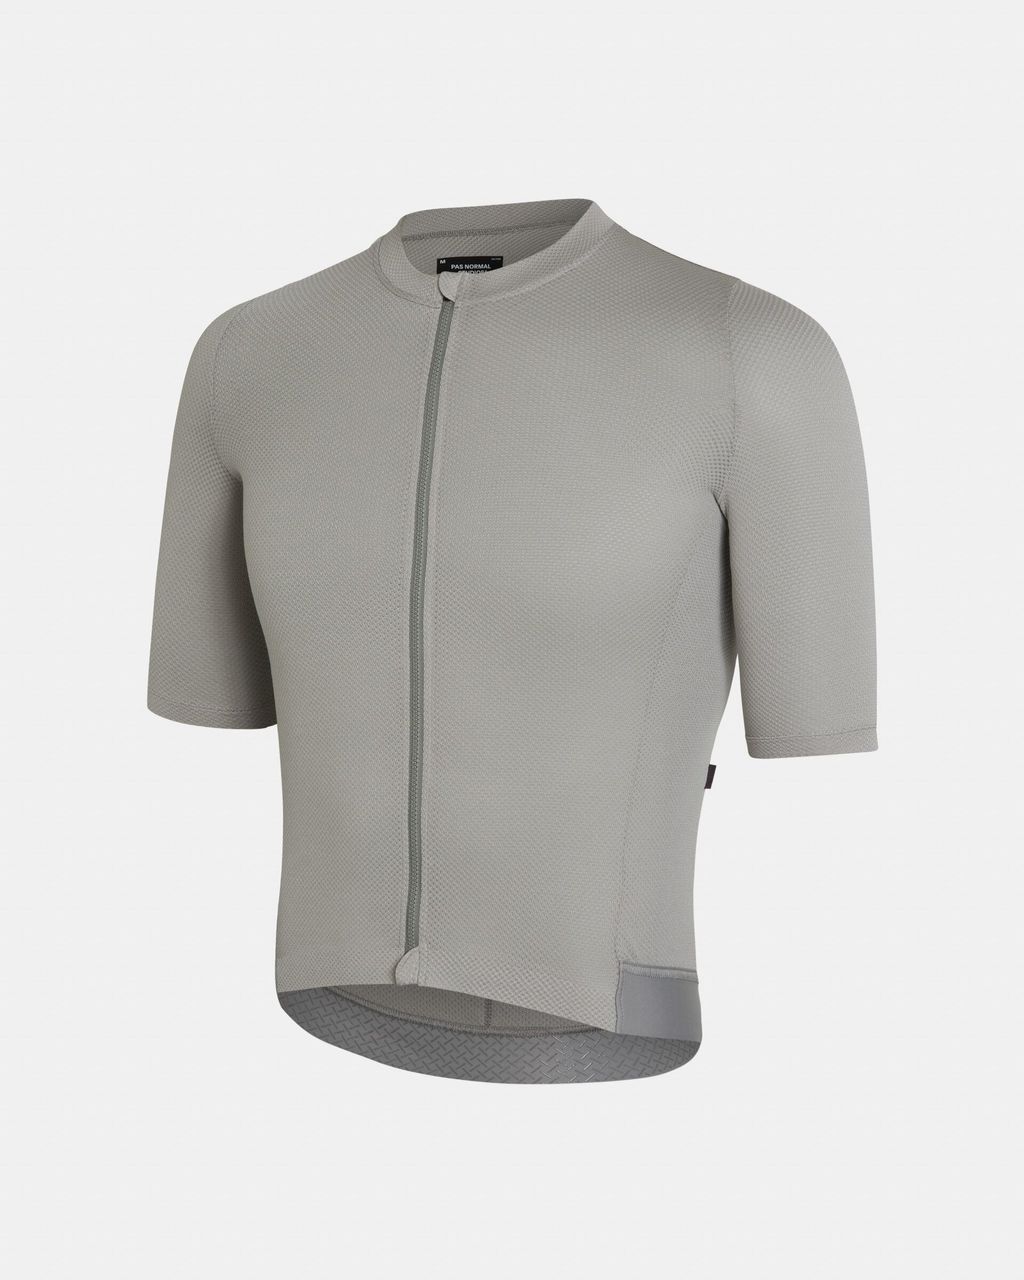 Mens-Solitude-Mesh-Jersey_Light-Grey_Side-pdp-page